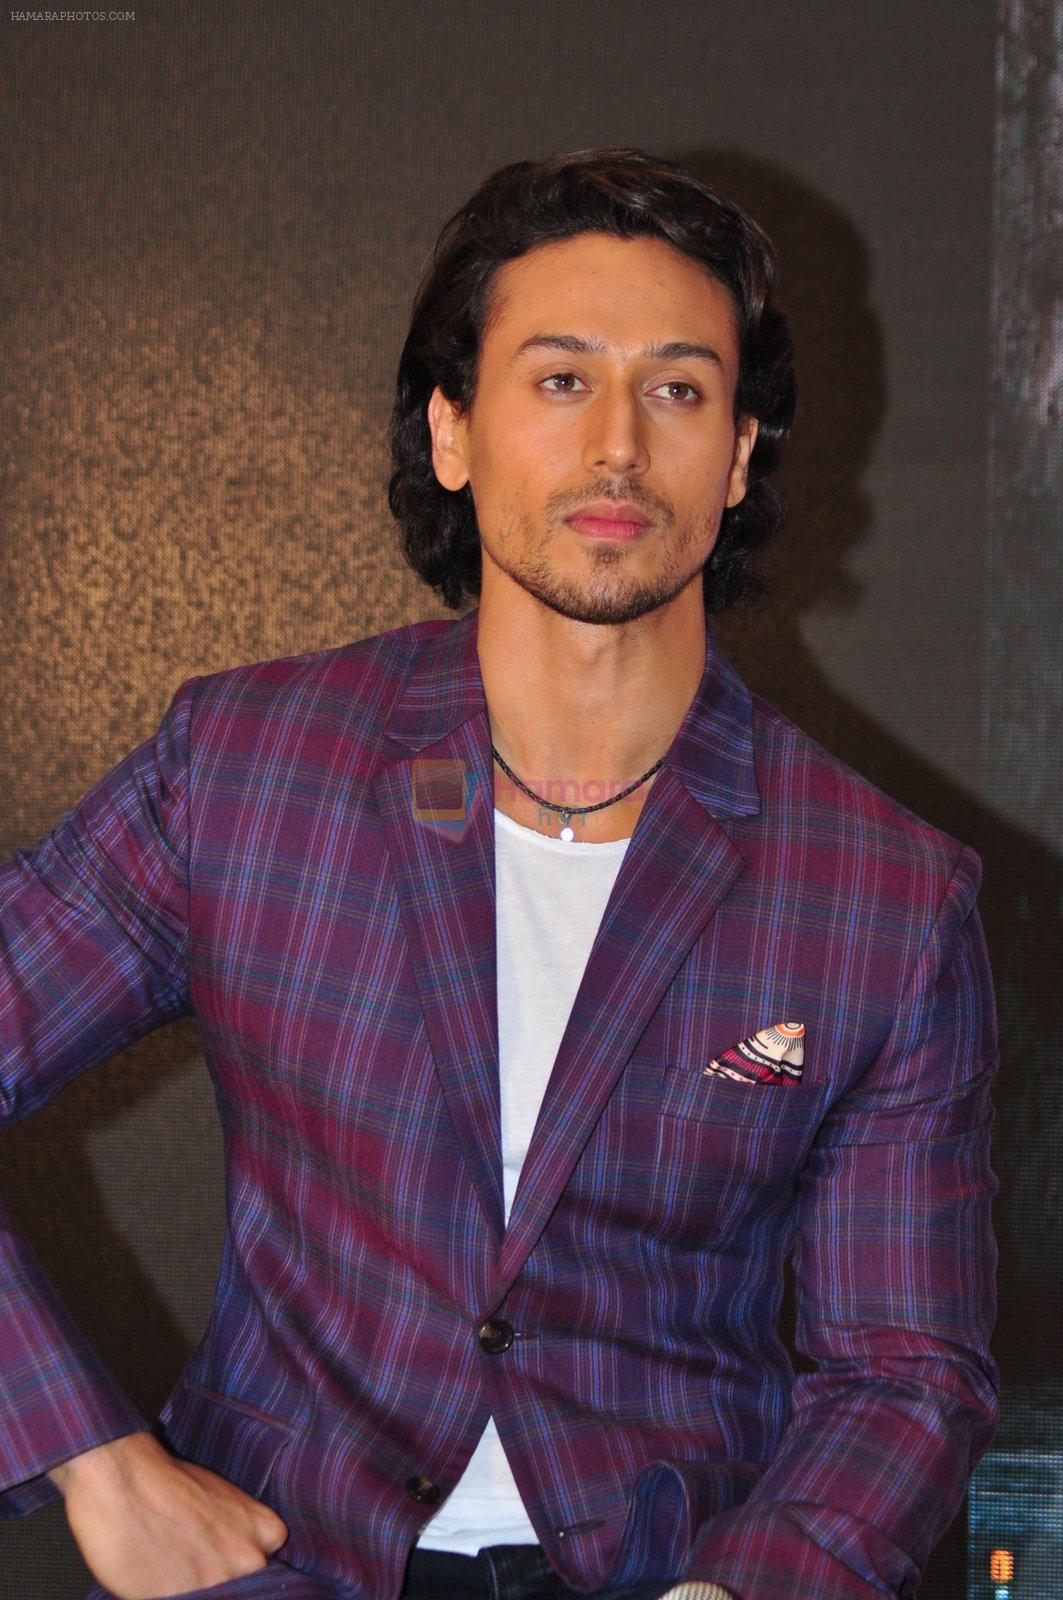 Tiger Shroff at Baaghi promotions in Mumbai on 22nd April 2016